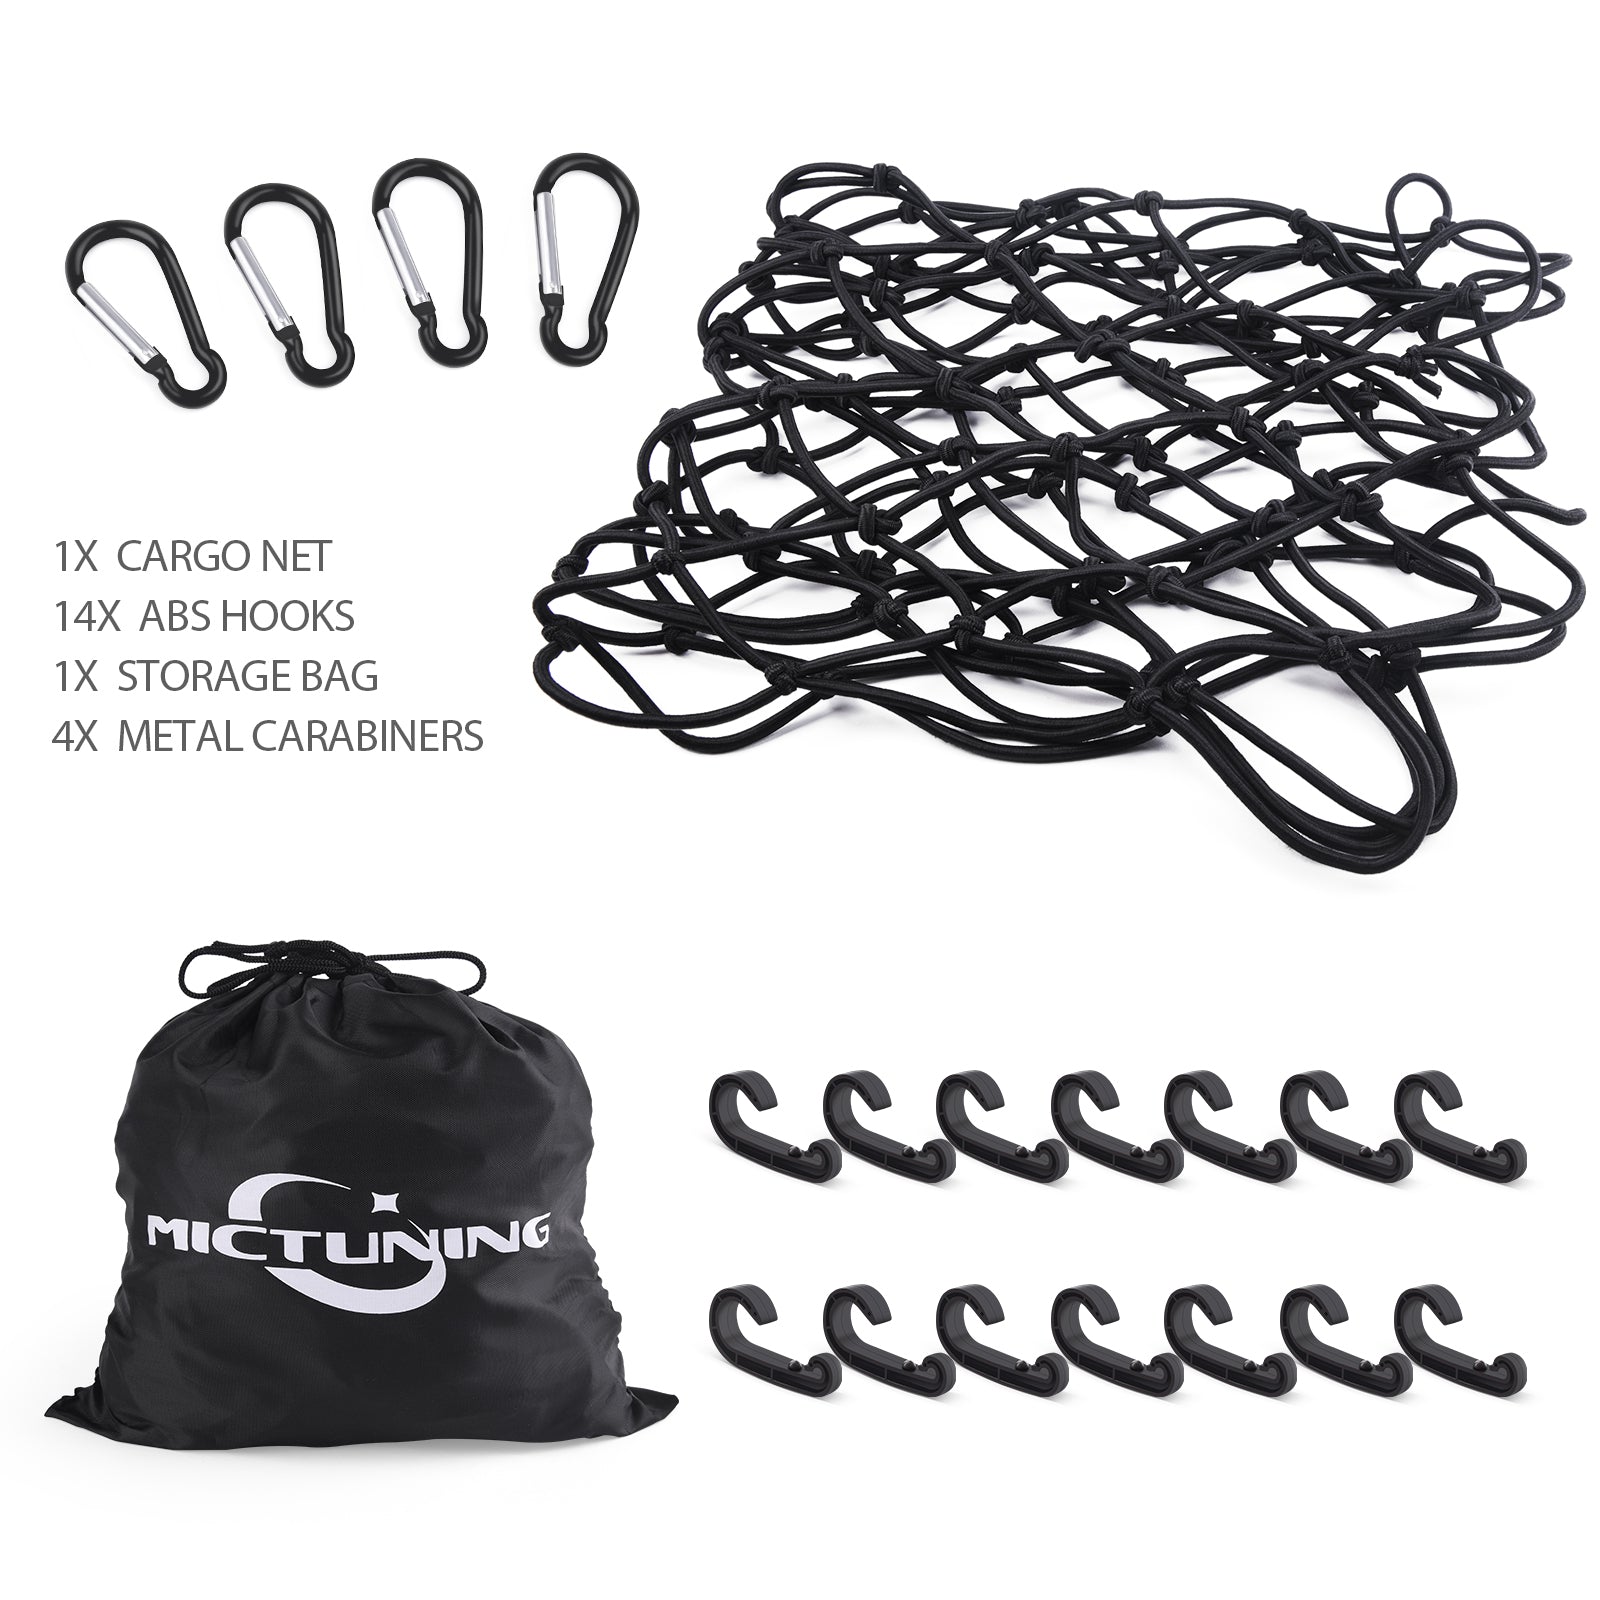 Mesh Cargo Nets 47" x 36", 6mm Heavy Duty Bungee Cord Net Stretches to 70" x 54" with 14pcs ABS Hooks 4pcs D Shape